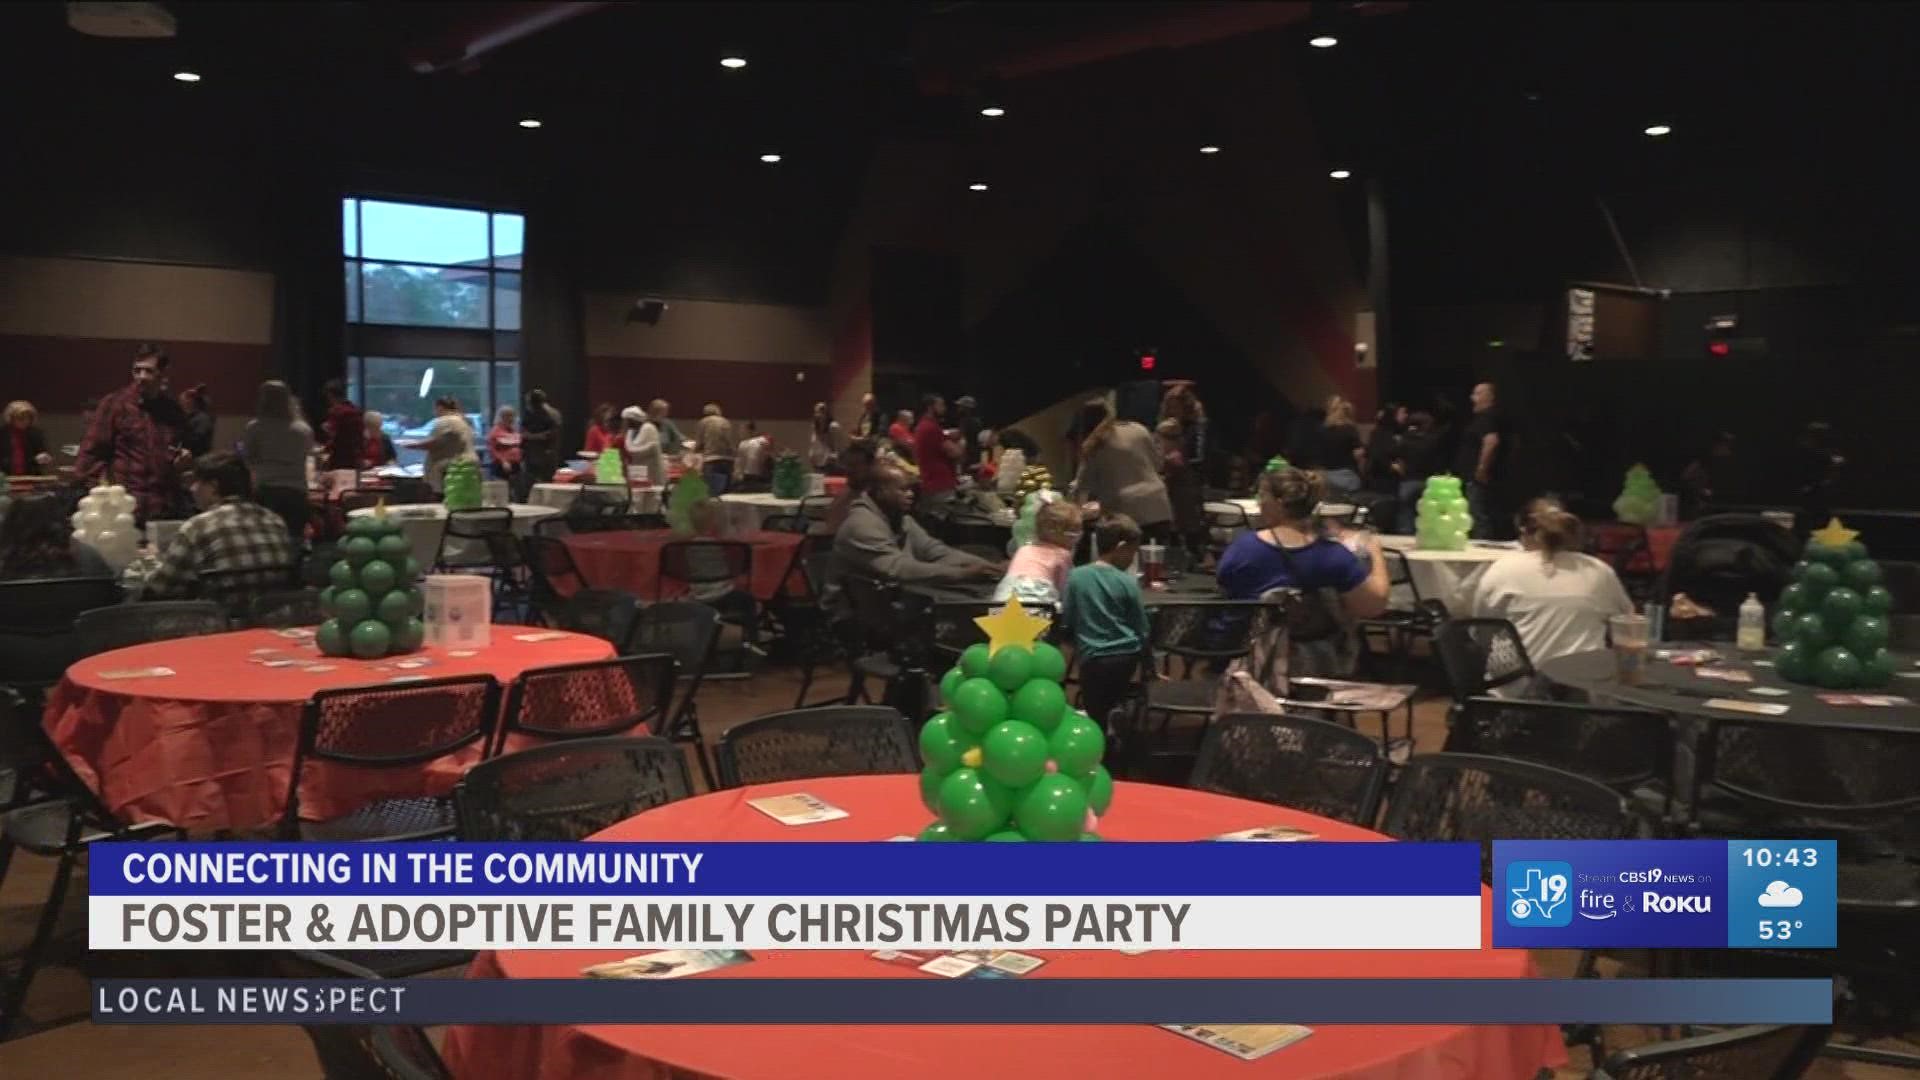 One East Texas church wanted to help connect foster families with each other.
what's a better way to do that than with Christmas Spirit.